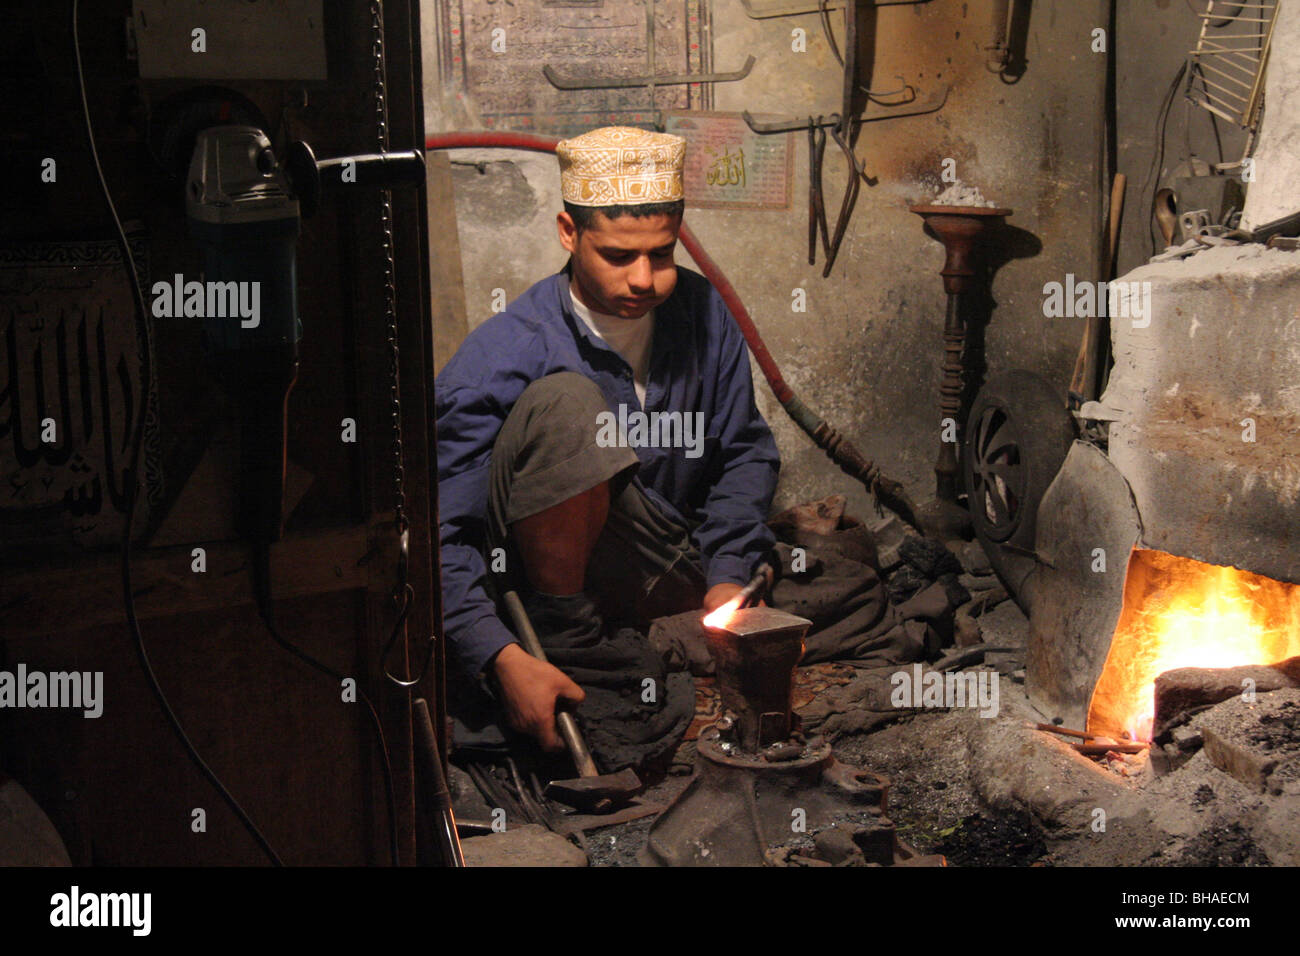 Sanaa, Yemen. A young man forges metal in the furnace, the traditional way. Chewing qat and at night. Stock Photo